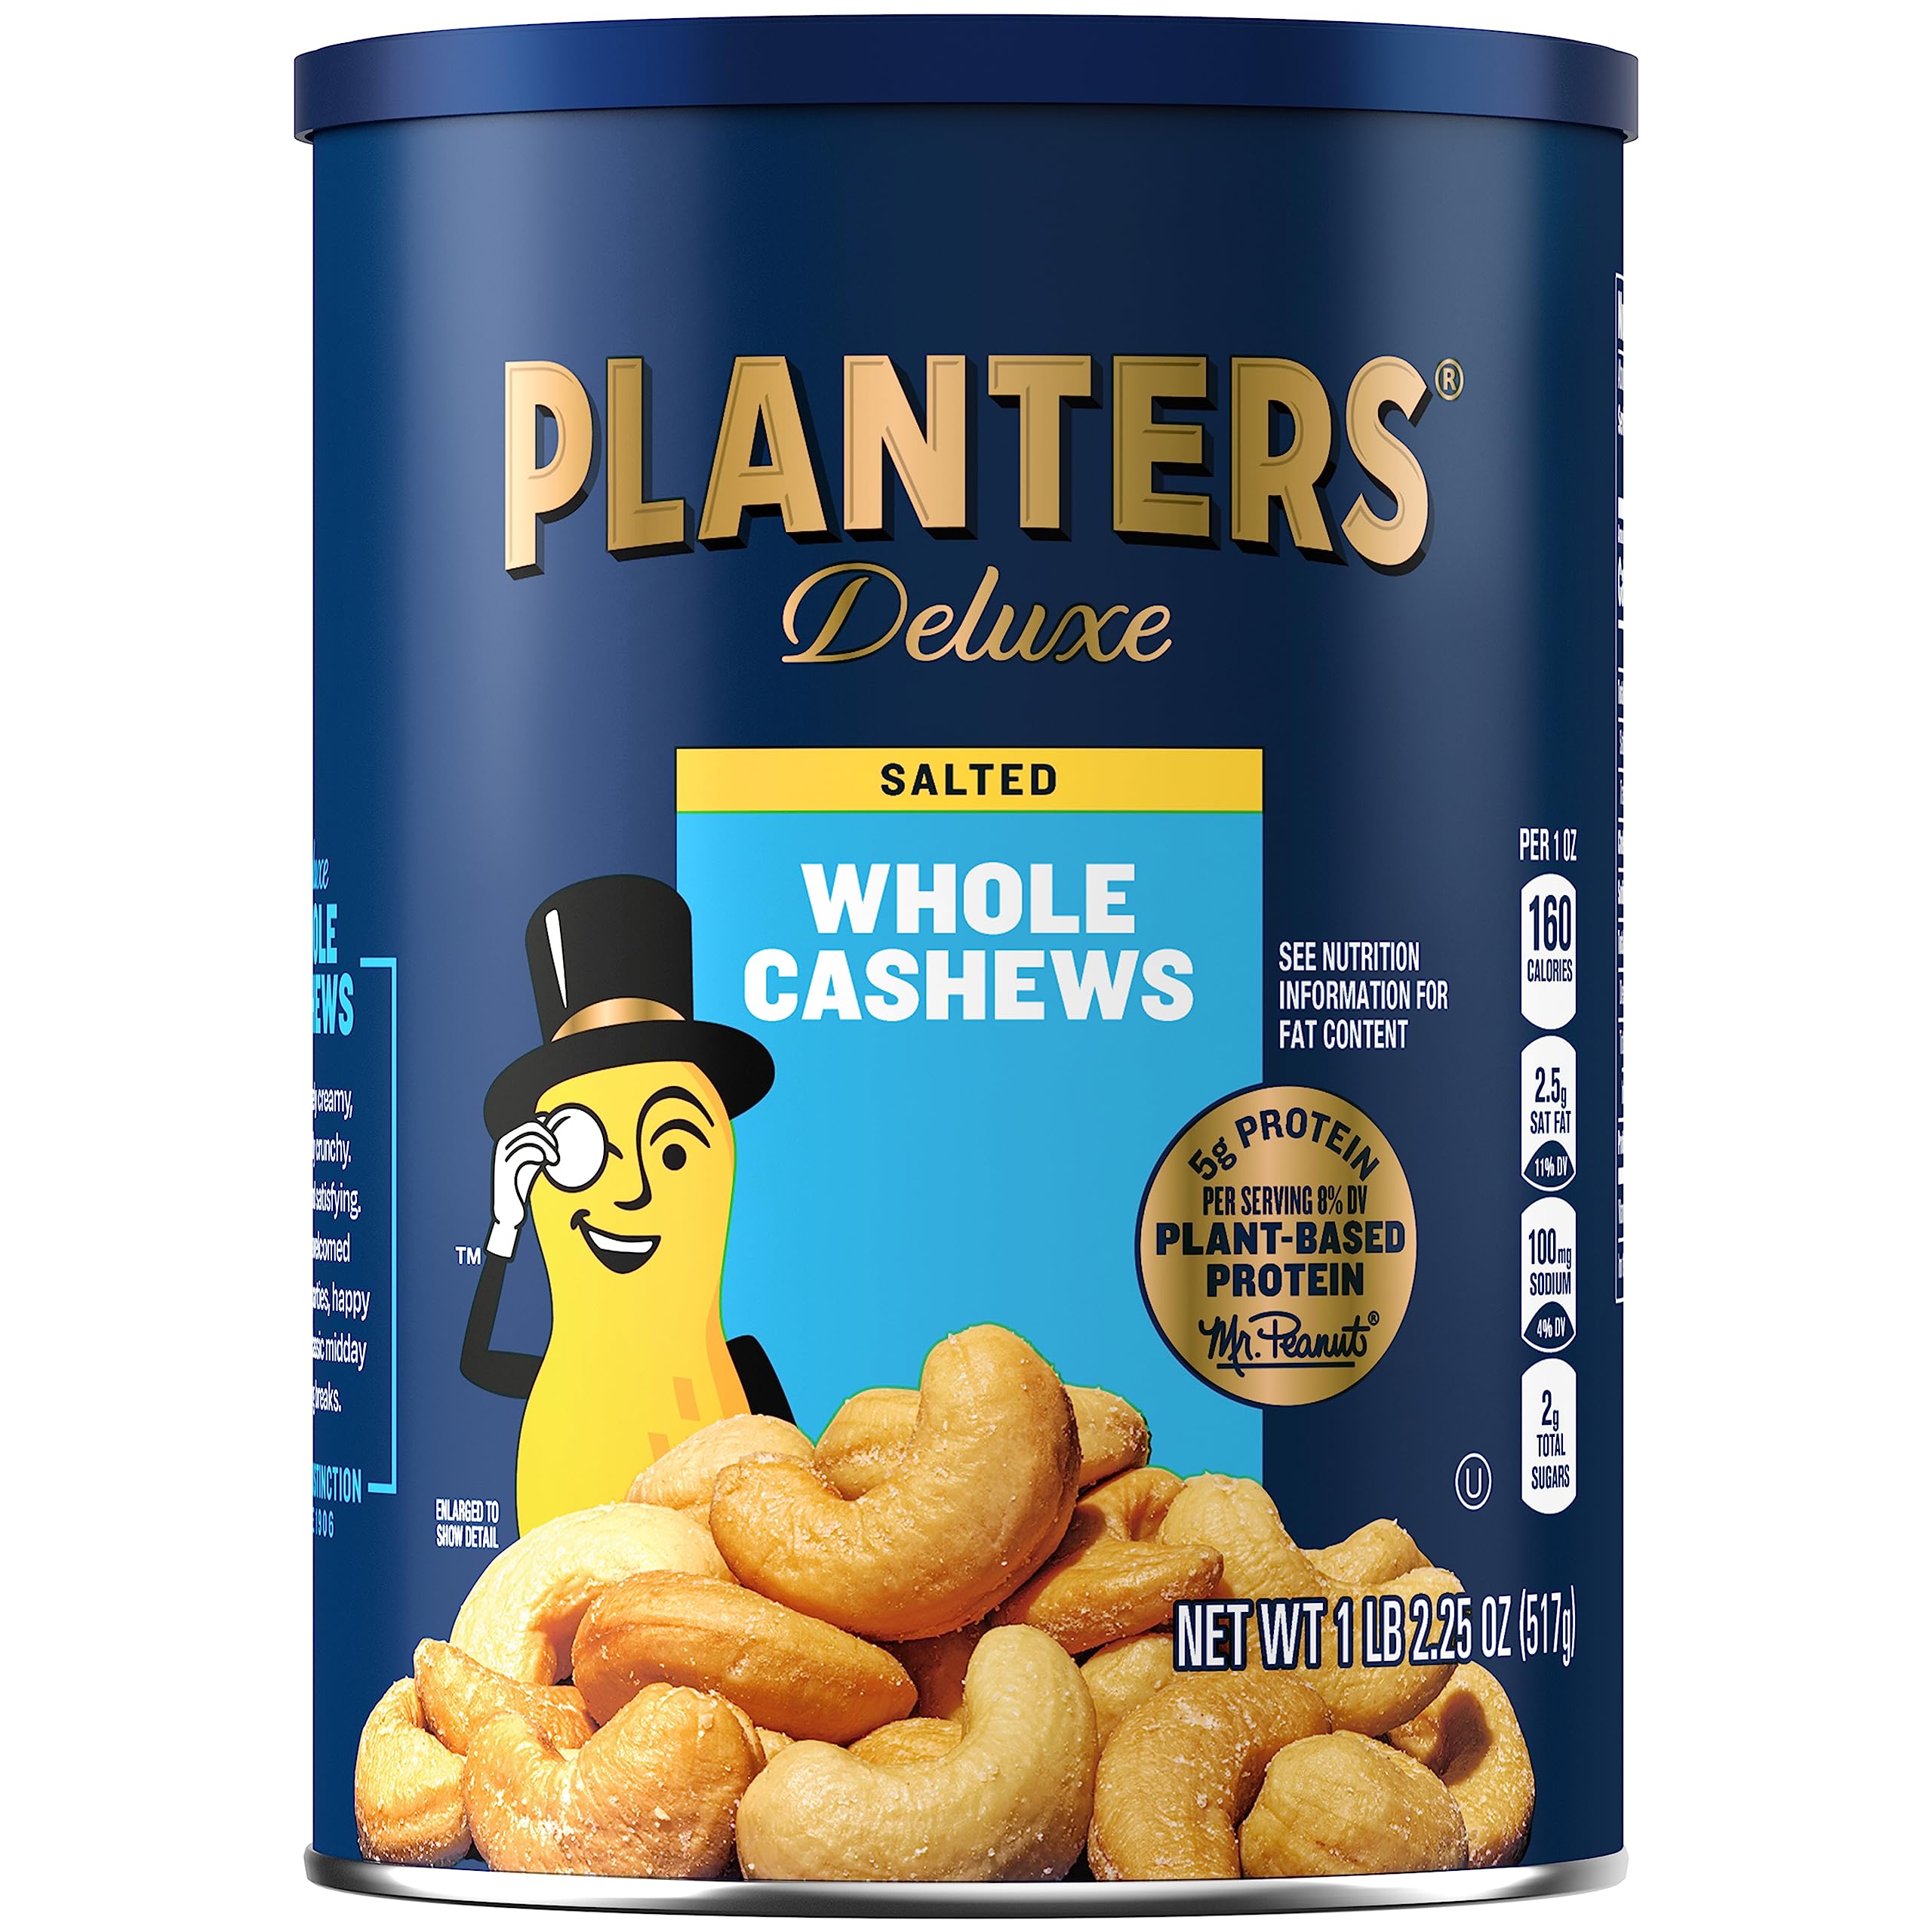 18.25-oz Planters Deluxe Whole Cashews (Salted) $6.64 w/ Subscribe & Save